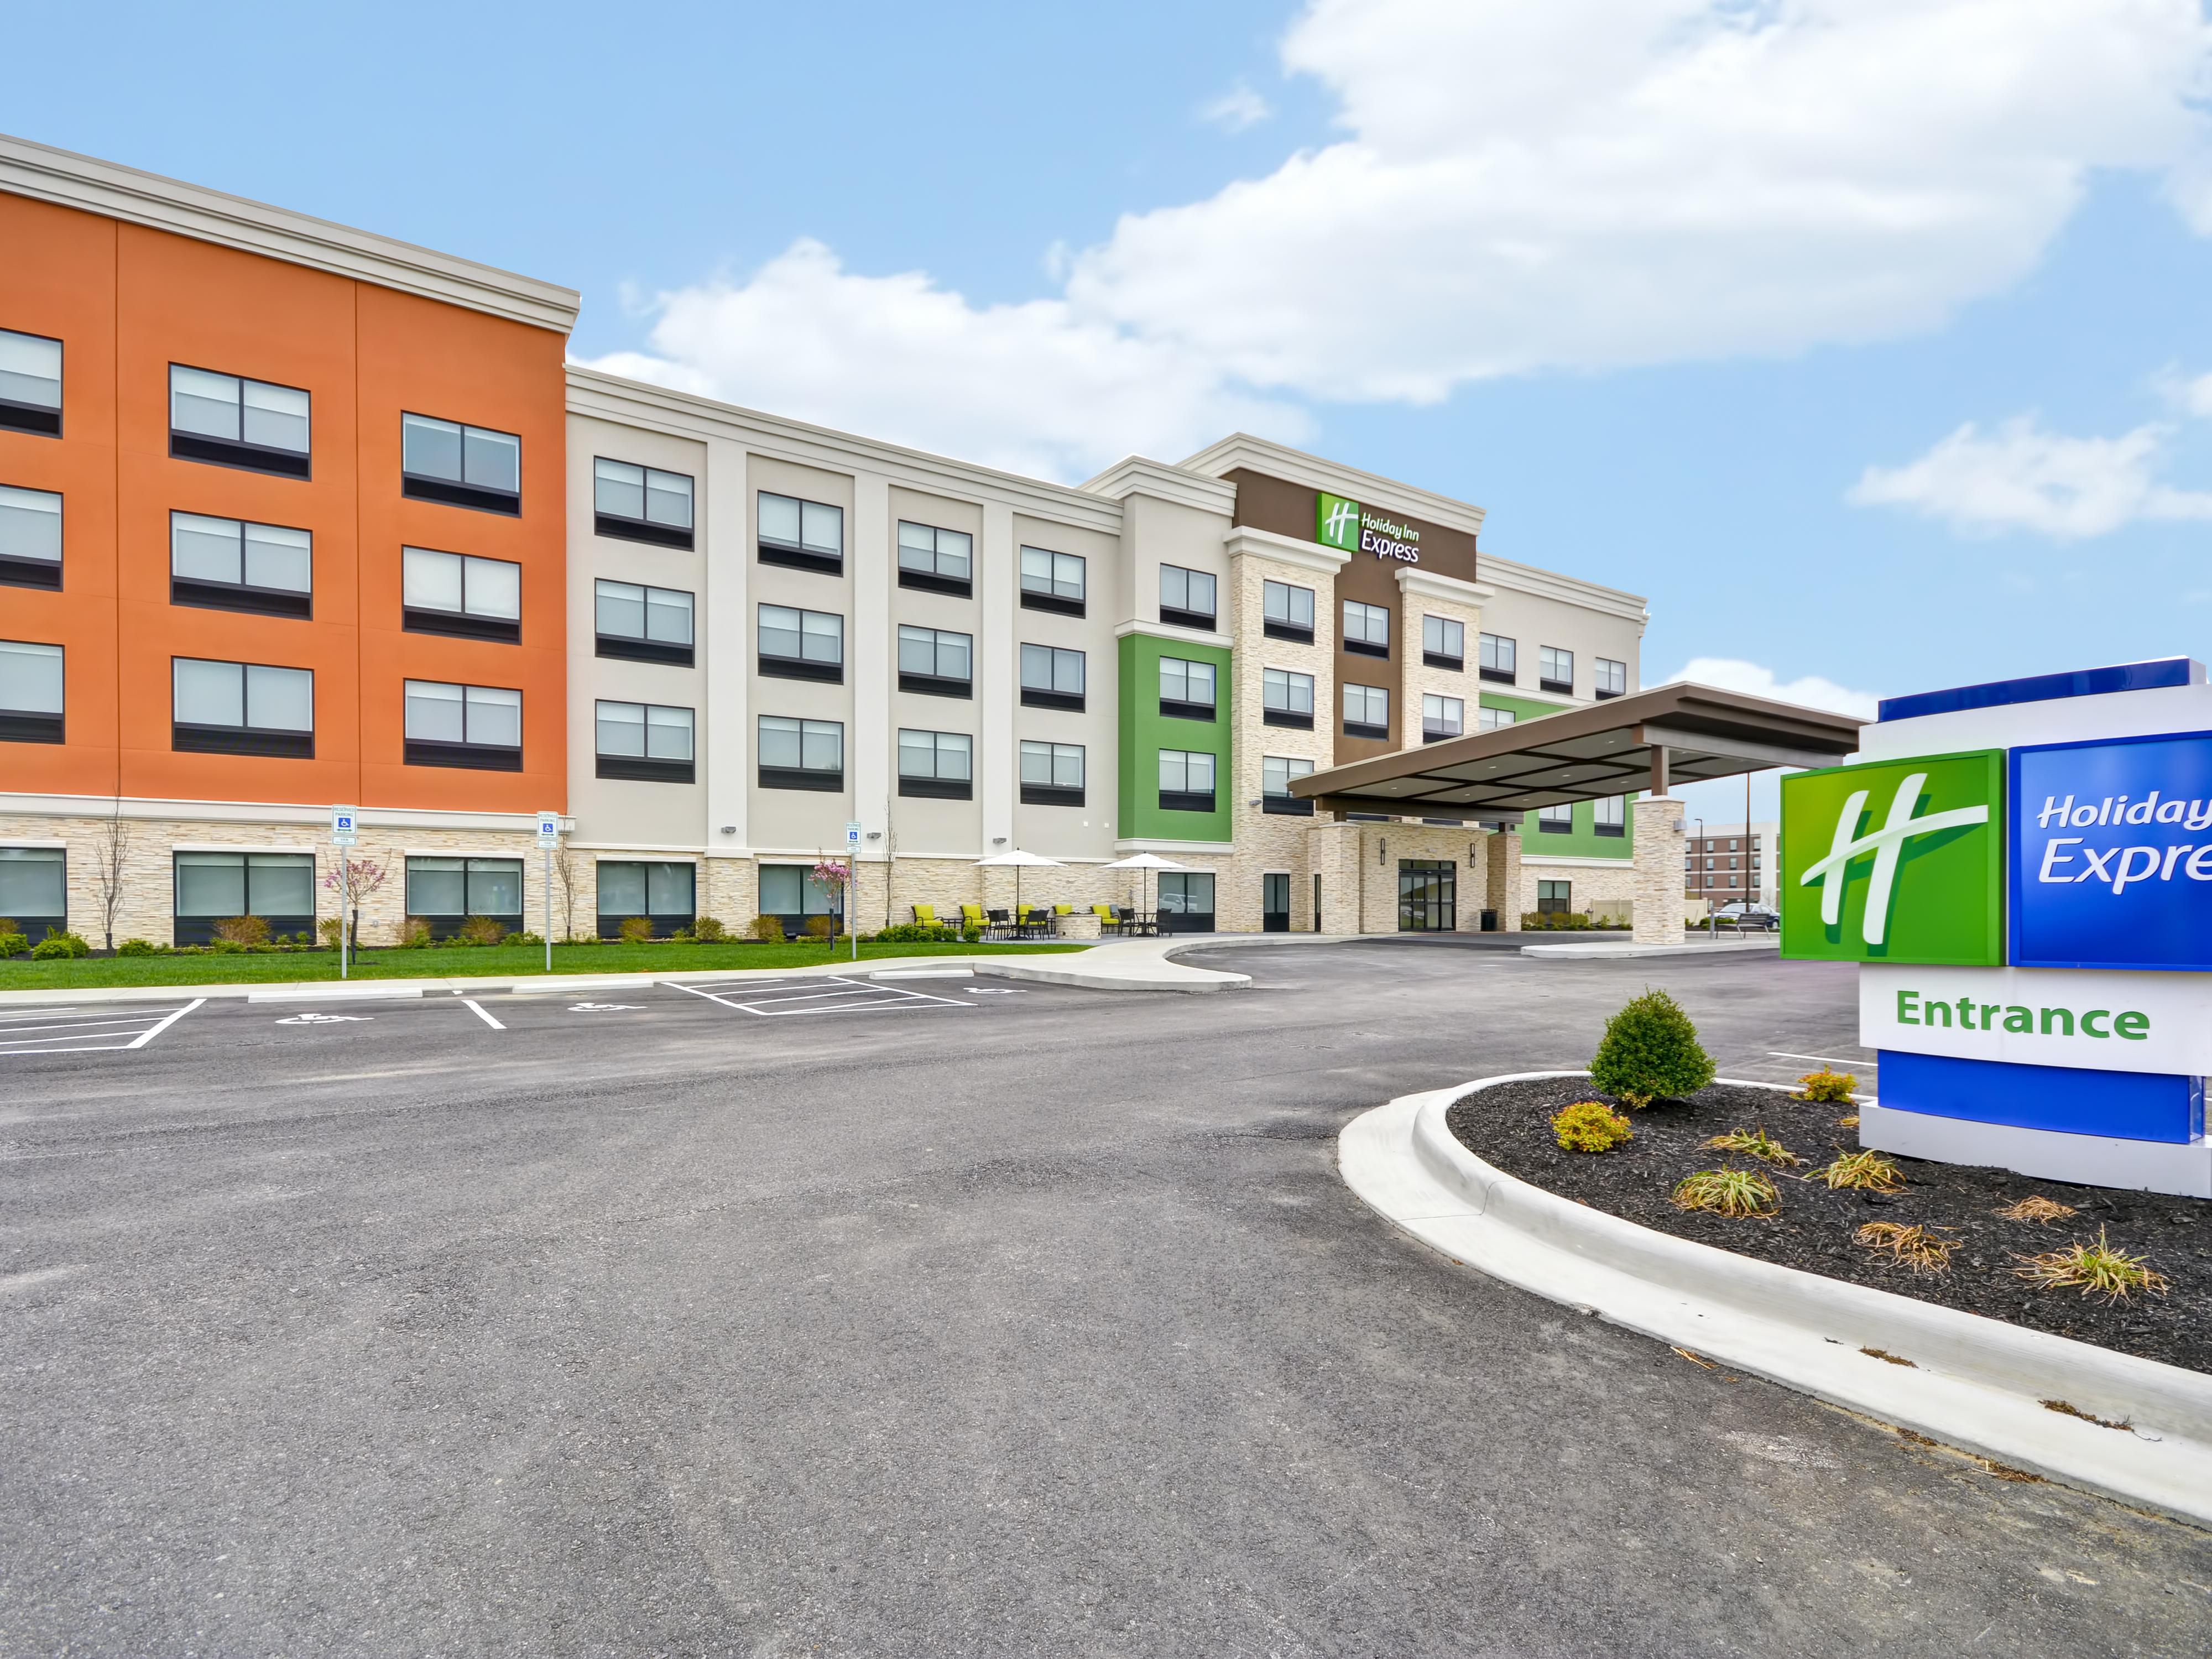 Hotels in Evansville, Indiana near Ford Center | Holiday Inn Express